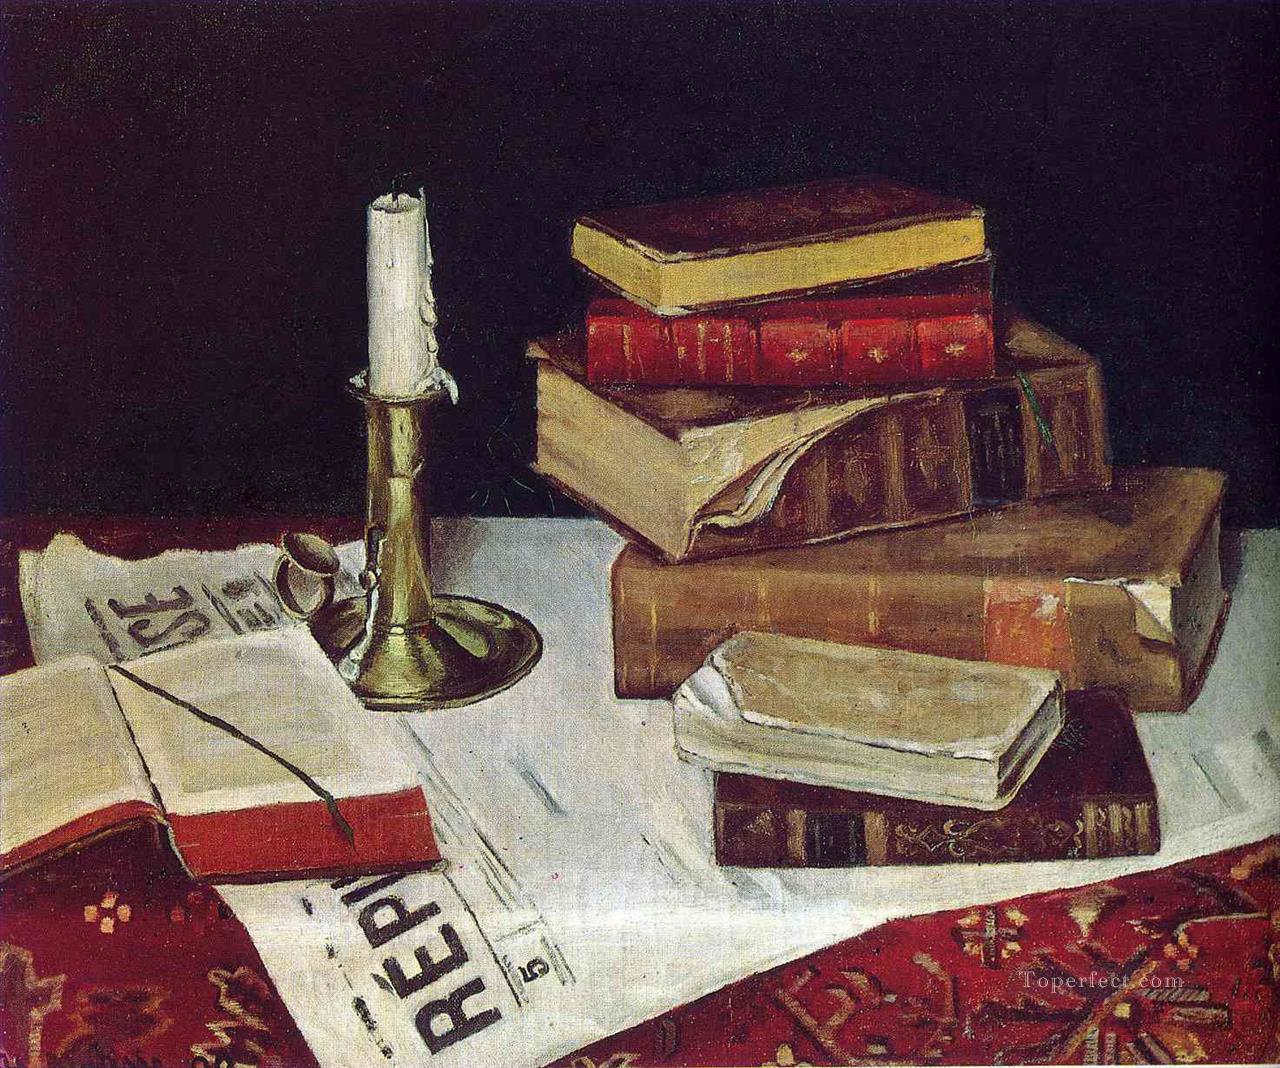 https://www.toperfect.com/pic/Oil%20Painting%20Styles%20on%20Canvas/Still%20life/Impressionist/3-books-and-candle-1890-still-life.jpg